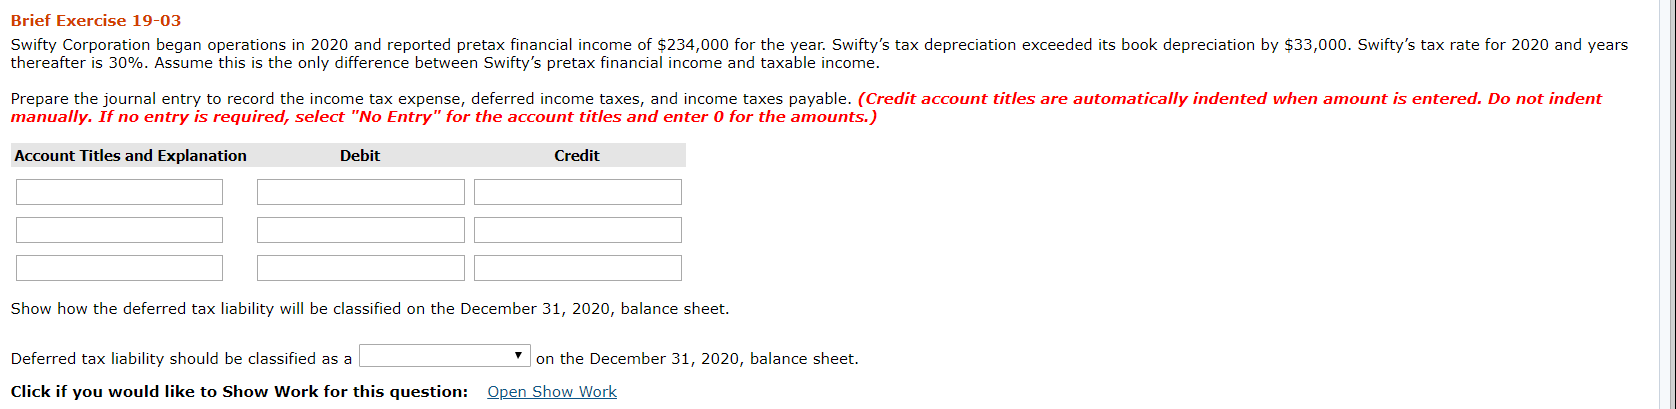 Brief Exercise 19-03
Swifty Corporation began operations in 2020 and reported pretax financial income of $234,000 for the year. Swifty's tax depreciation exceeded its book depreciation by $33,000. Swifty's tax rate for 2020 and years
thereafter is 30%. Assume this is the only difference between Swifty's pretax financial income and taxable income.
Prepare the journal entry to record the income tax expense, deferred income taxes, and income taxes payable. (Credit account titles are automatically indented when amount is entered. Do not indent
manually. If no entry is required, select "No Entry" for the account titles and enter 0 for the amounts.)
Account Titles and Explanation
Debit
Credit
Show how the deferred tax liability will be classified on the December 31, 2020, balance sheet.
Deferred tax liability should be classified as a
on the December 31, 2020, balance sheet.
Click if you would like to Show Work for this question: Open Show Work
